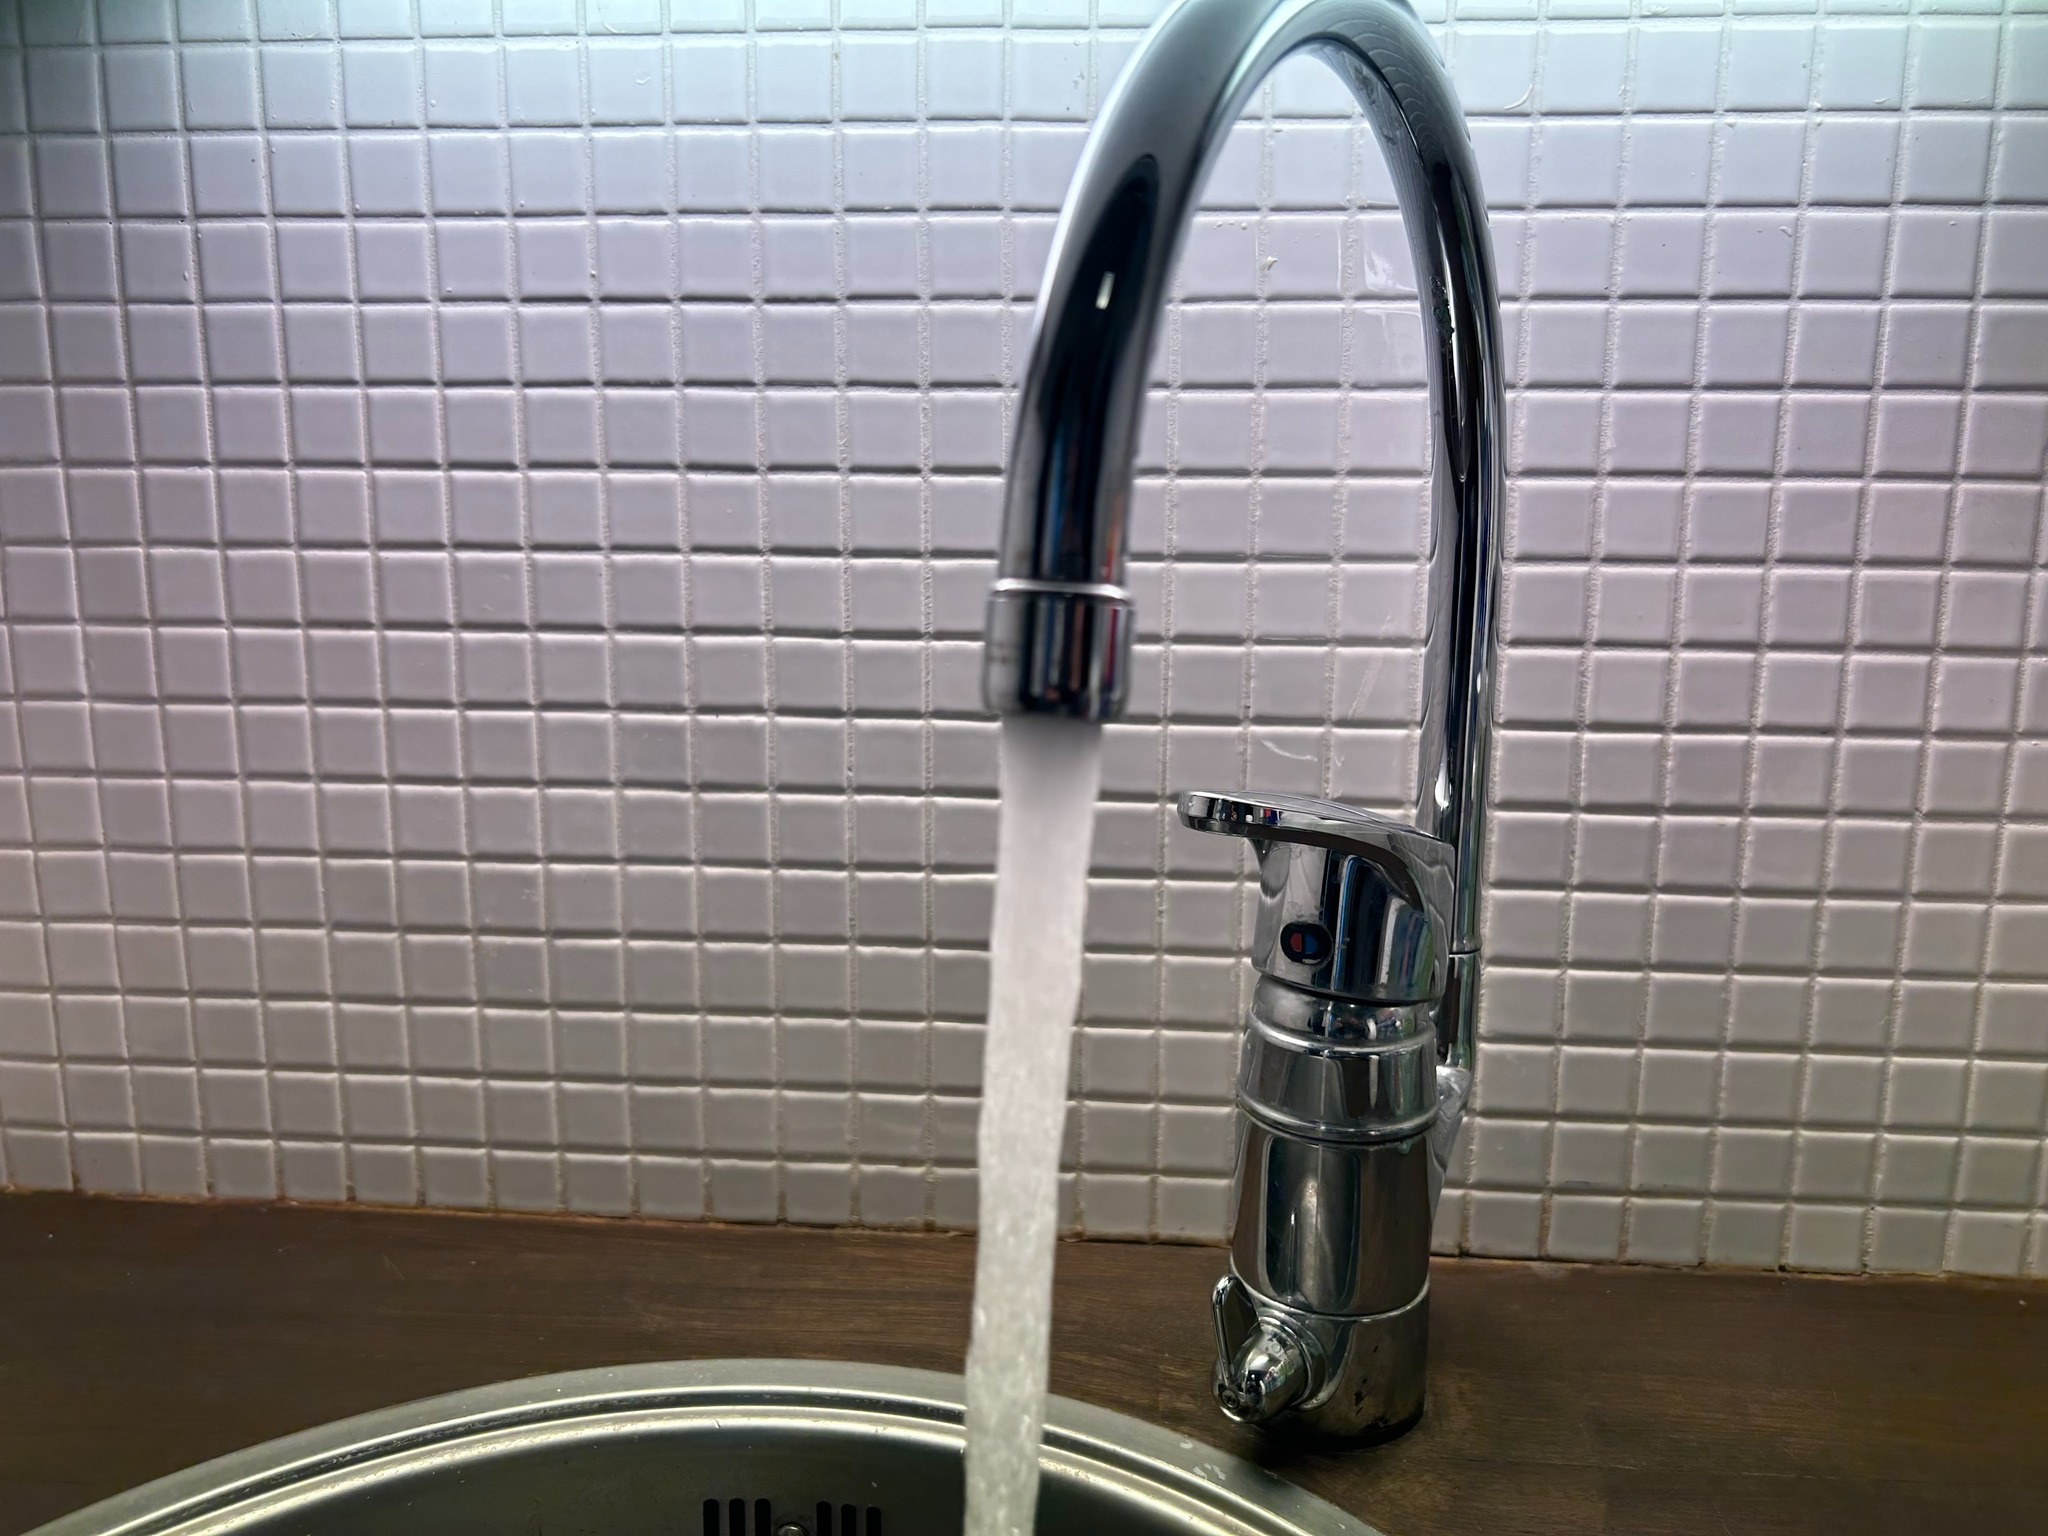 A water tap.